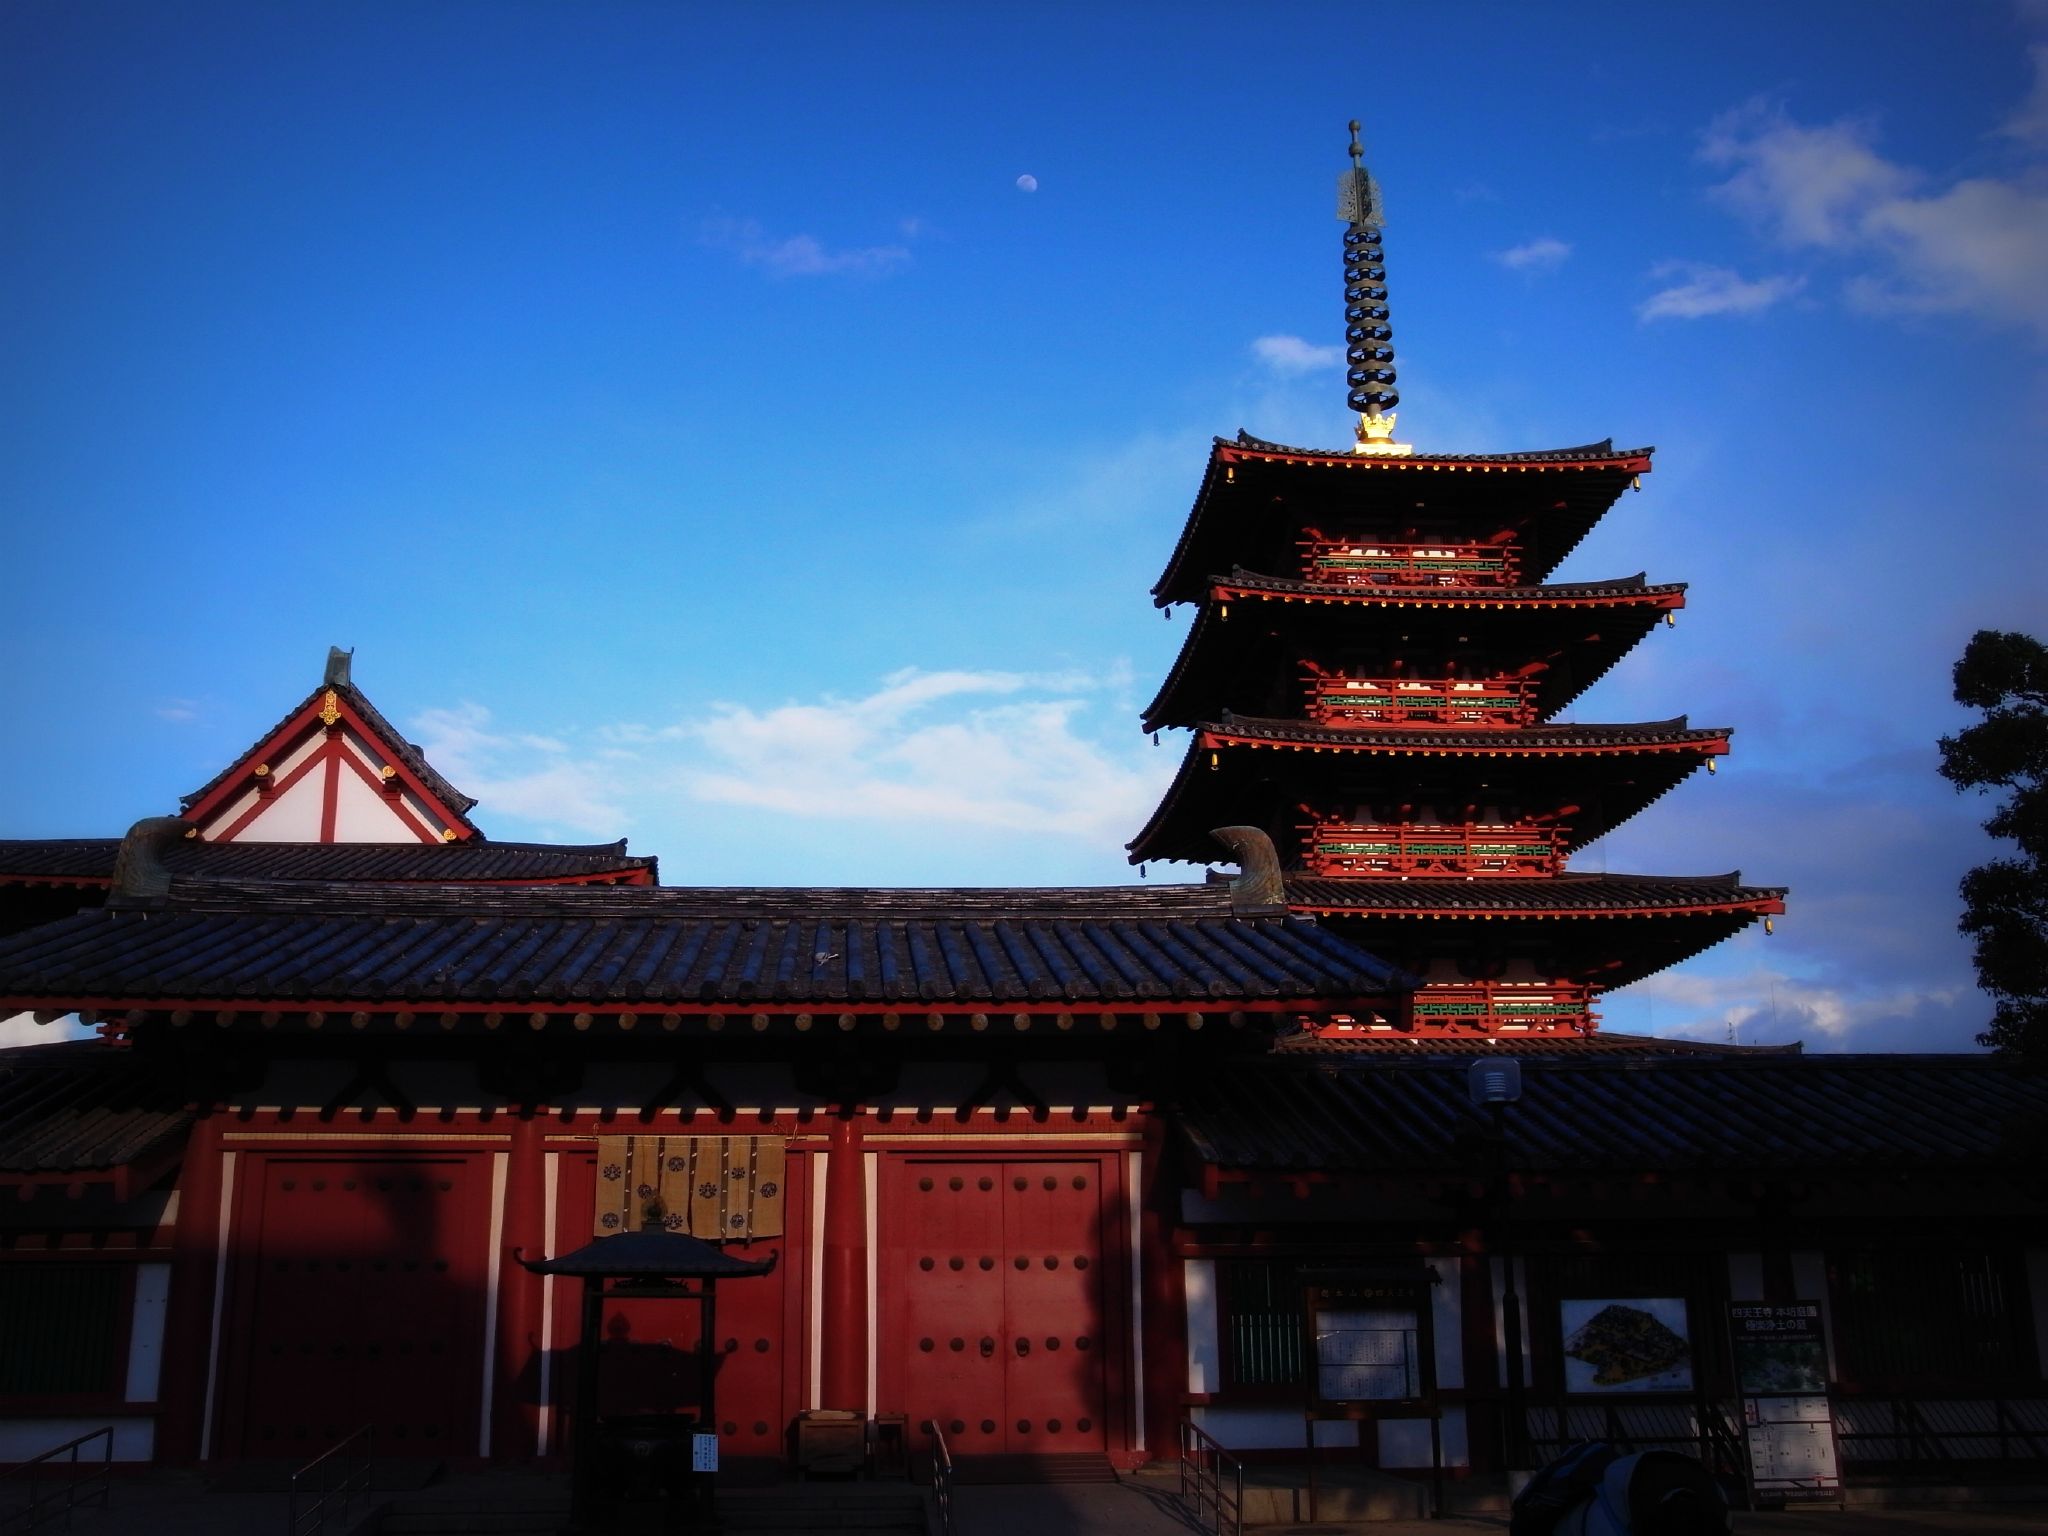 the large pagoda has an elaborate red roof